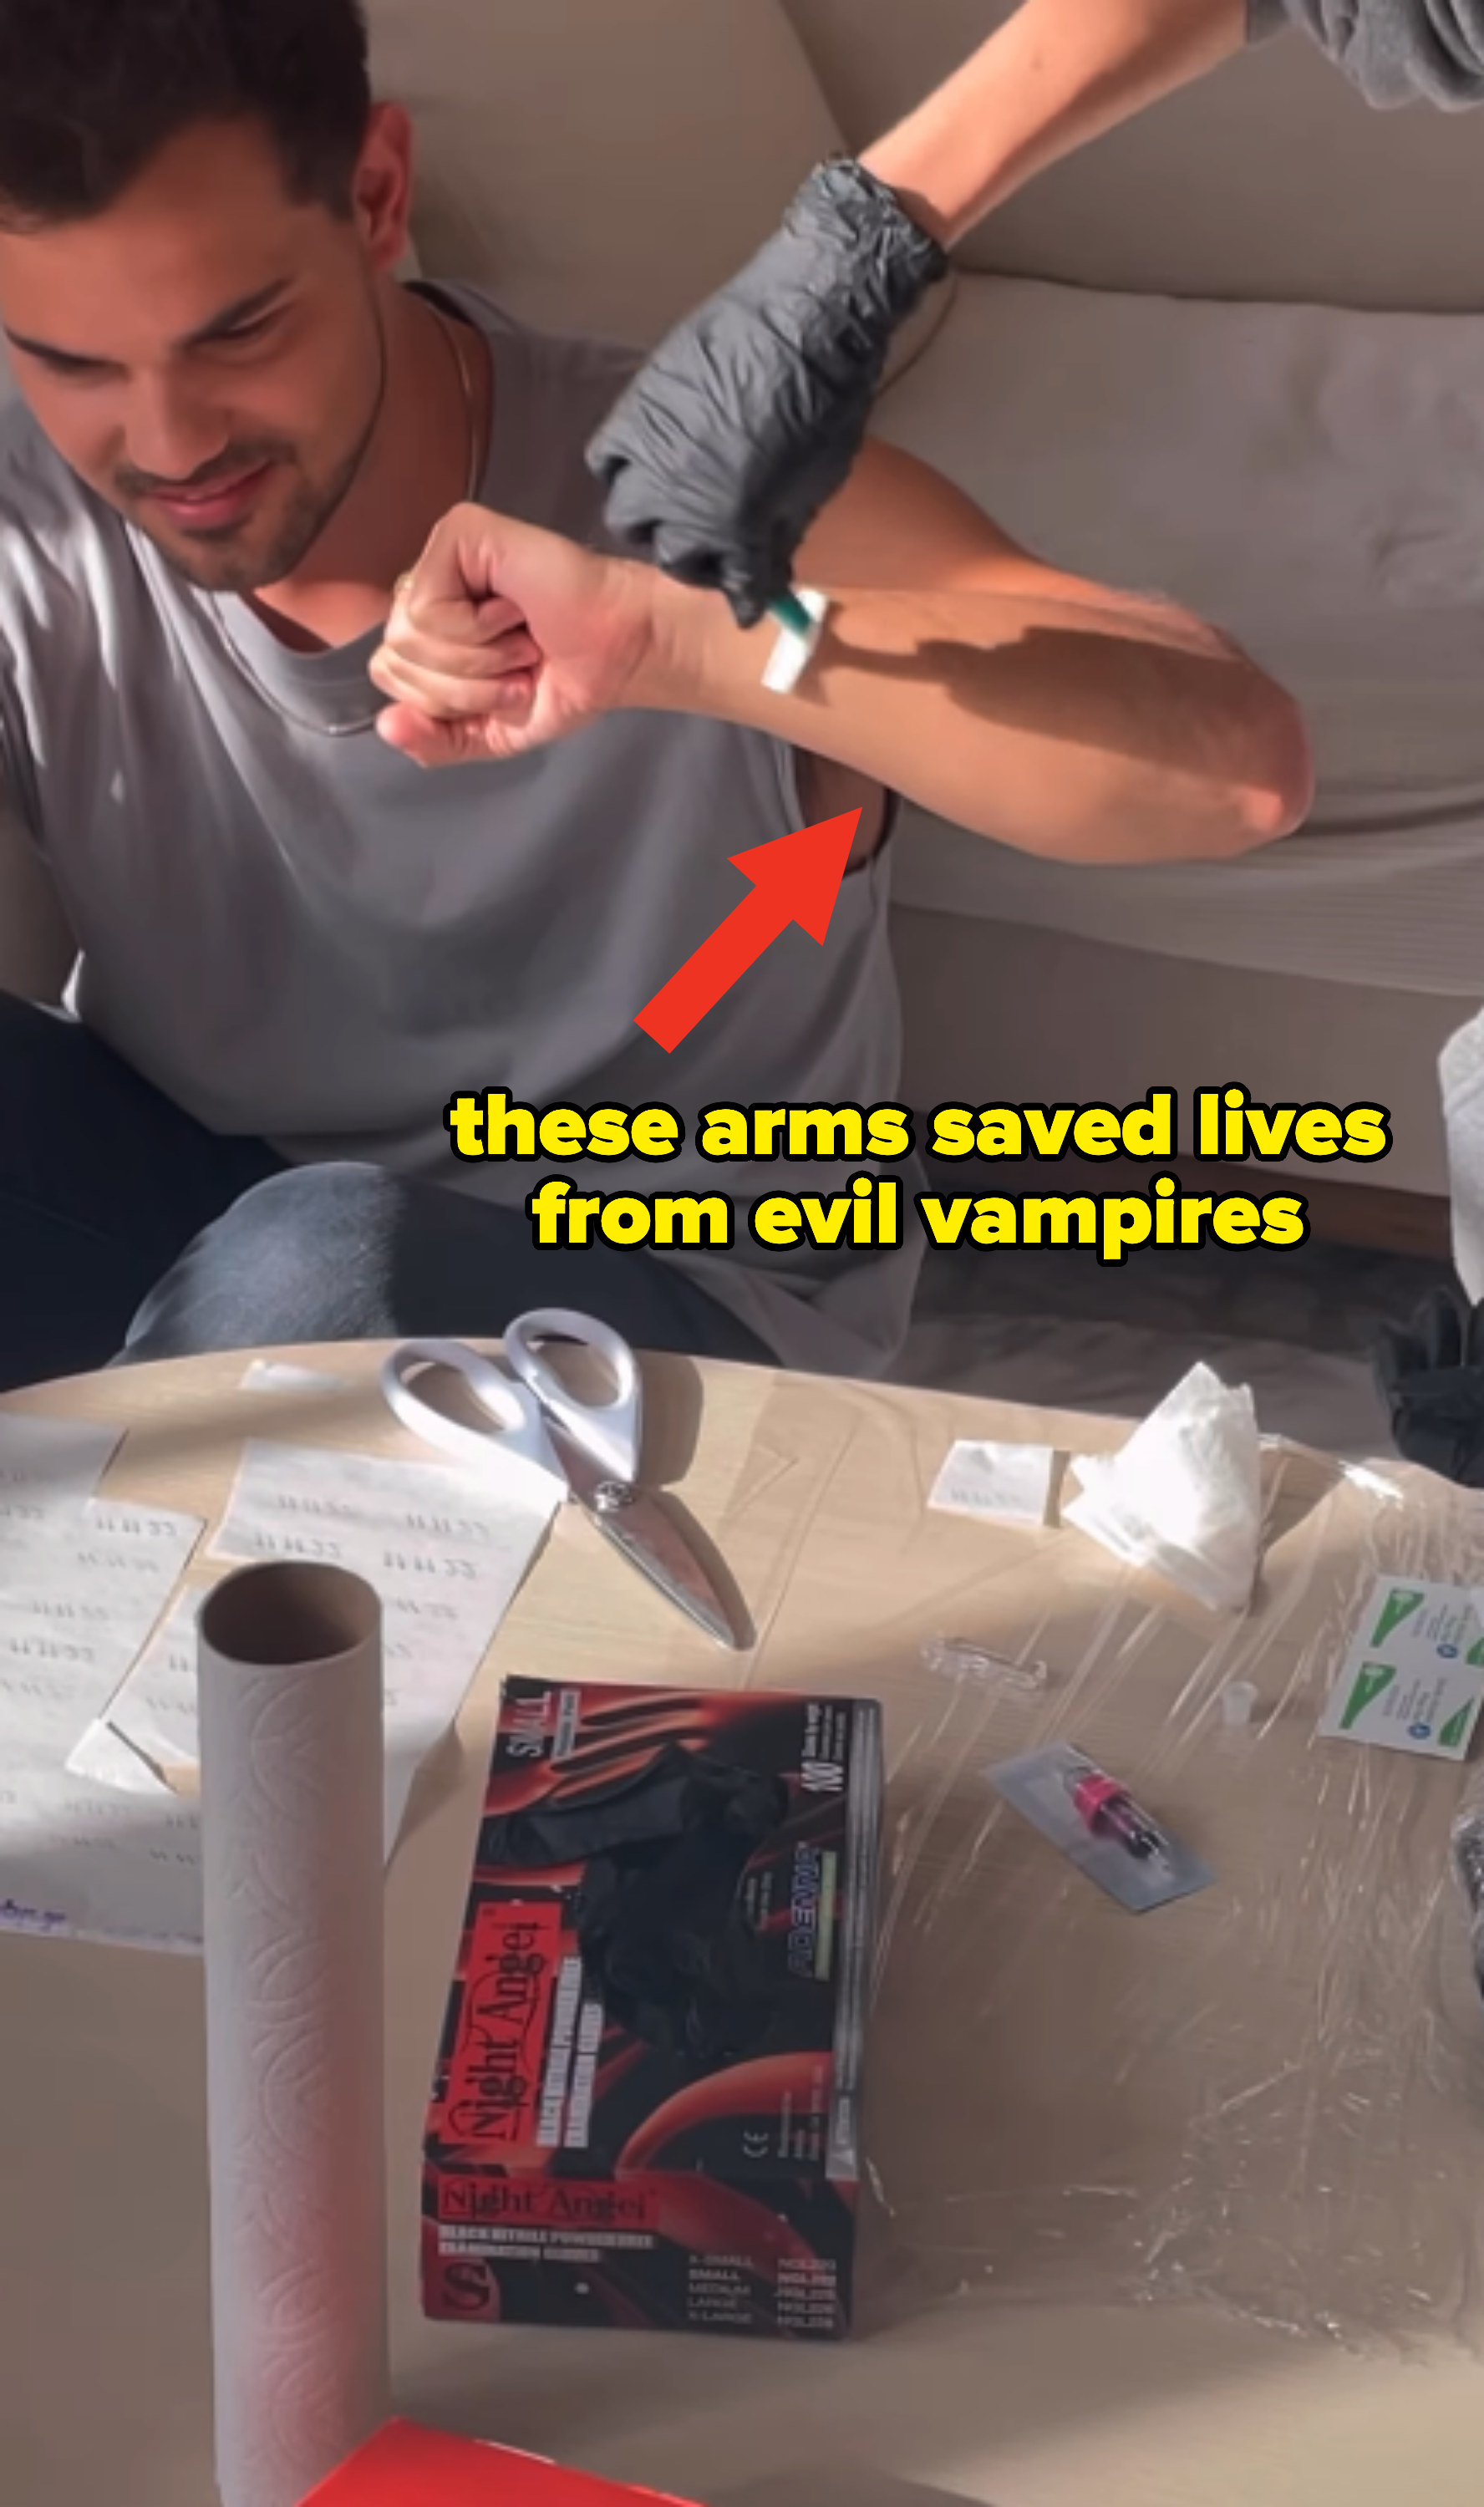 taylor sitting down having his arm prepped with text, these arms saved lives from evil vampires